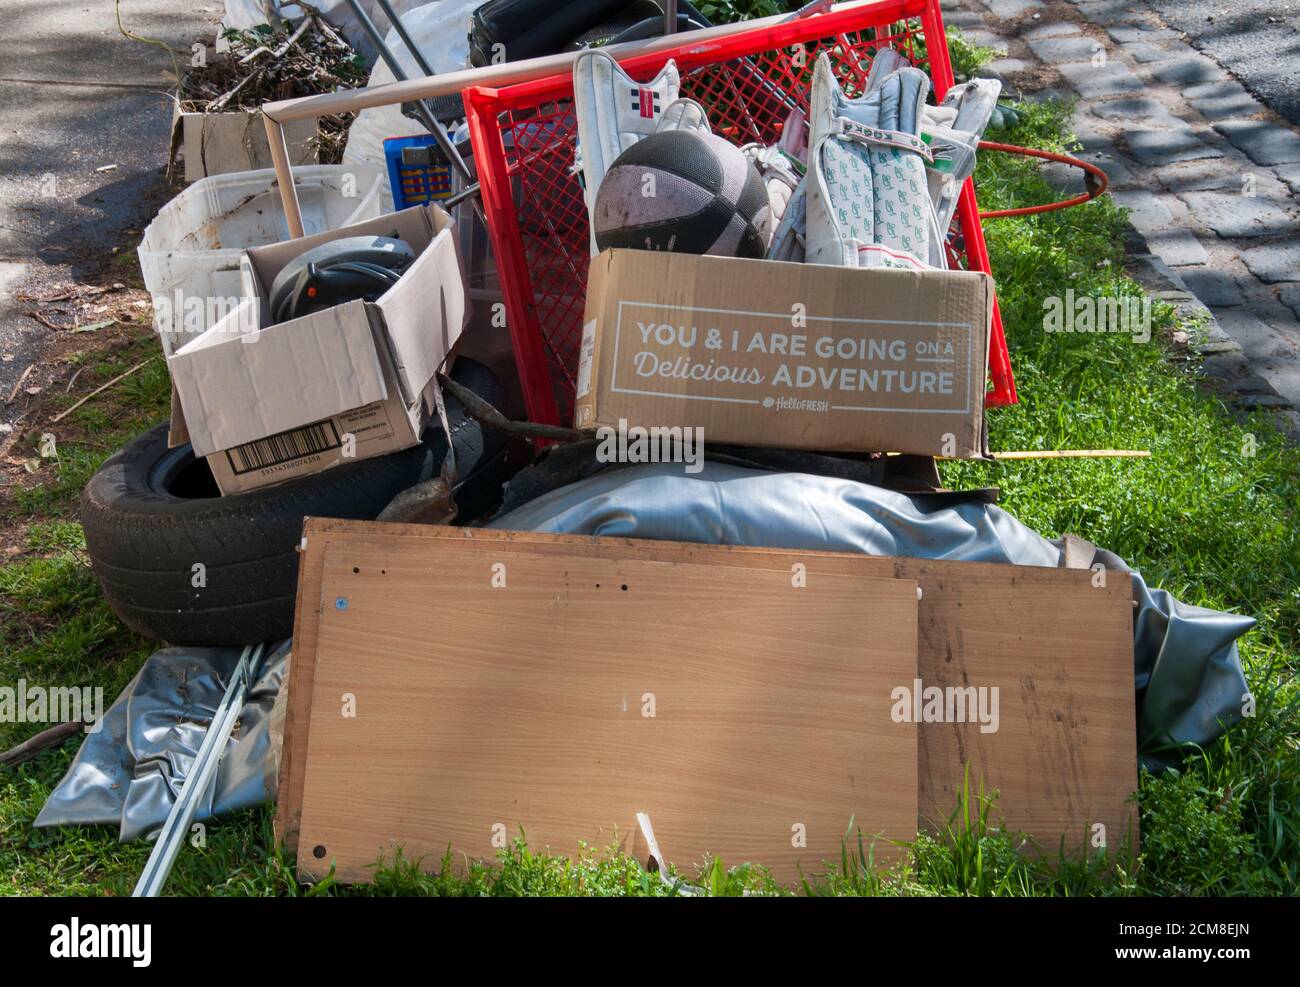 Incongruous message appears on a pile of dumped household junk, Melbourne, Australia Stock Photo